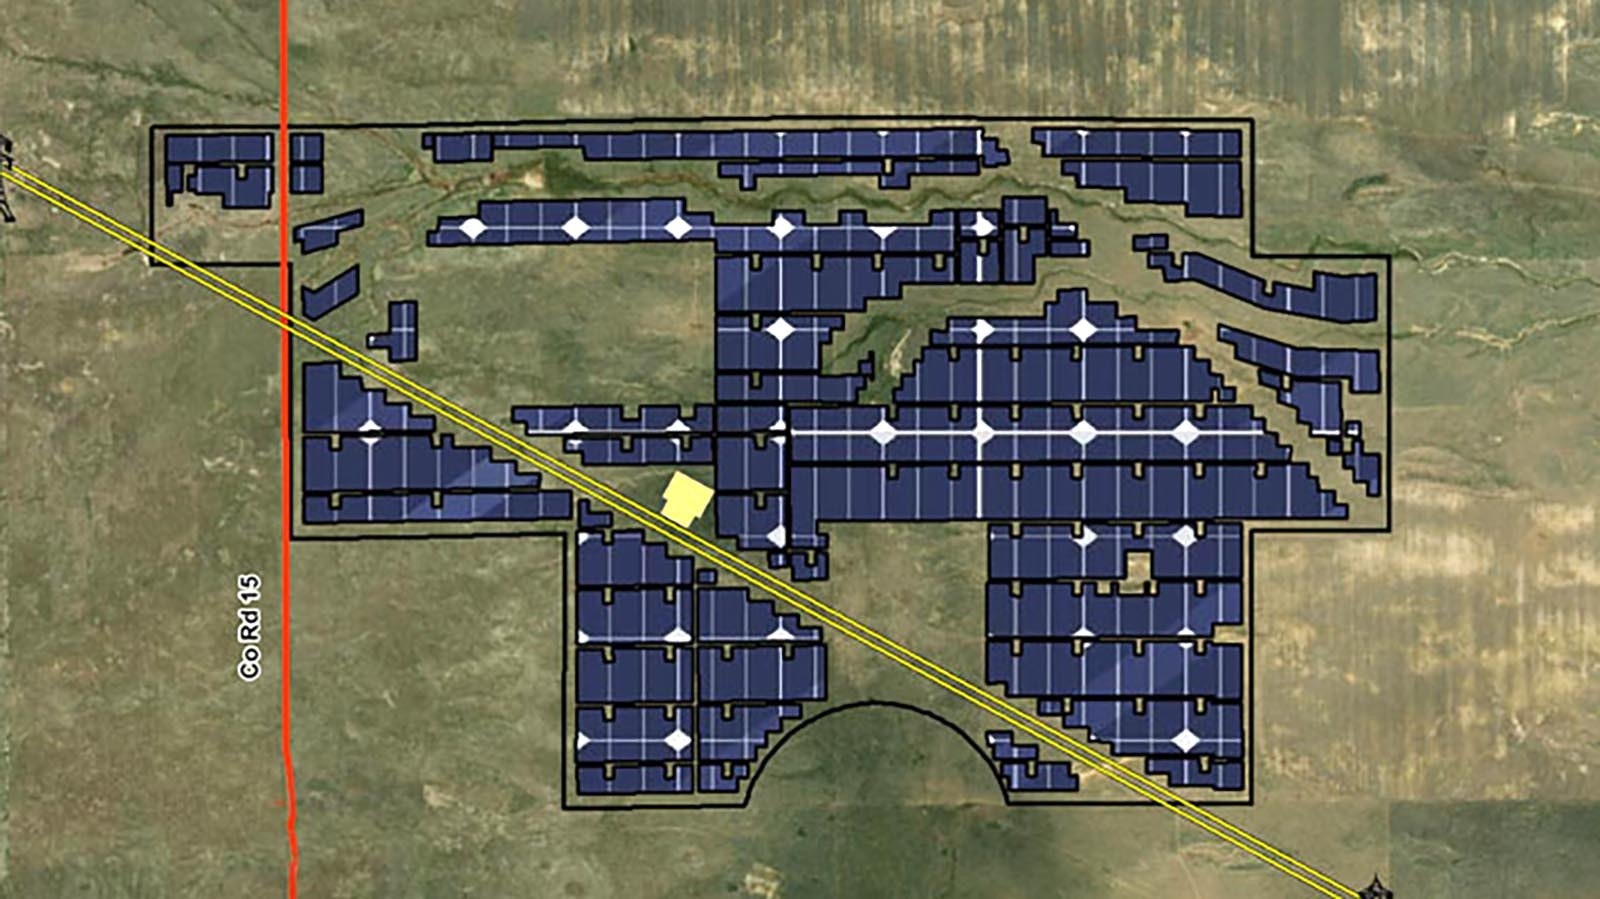 An illustration of the planned layout for the Goshen Solar project.